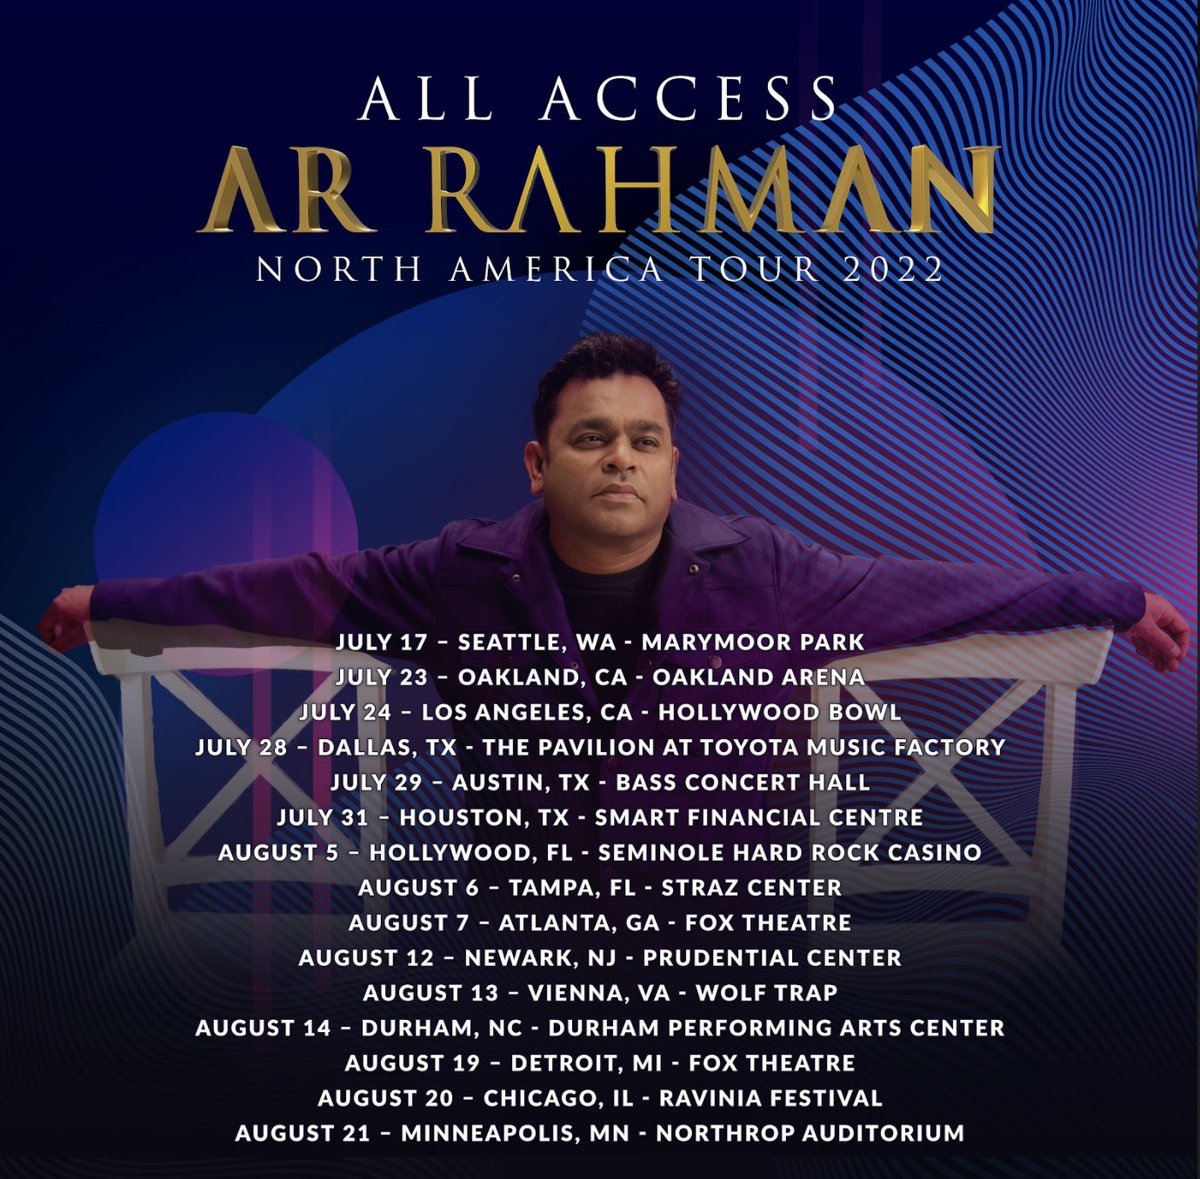 North America! Here are the venues for our tour! I look forward to seeing you all there! 
Until then, we’re getting ready with the music! 

#arrahman #arrahmanlive #allaccessarrahman #northamericatour2020 #healingworld #EPI